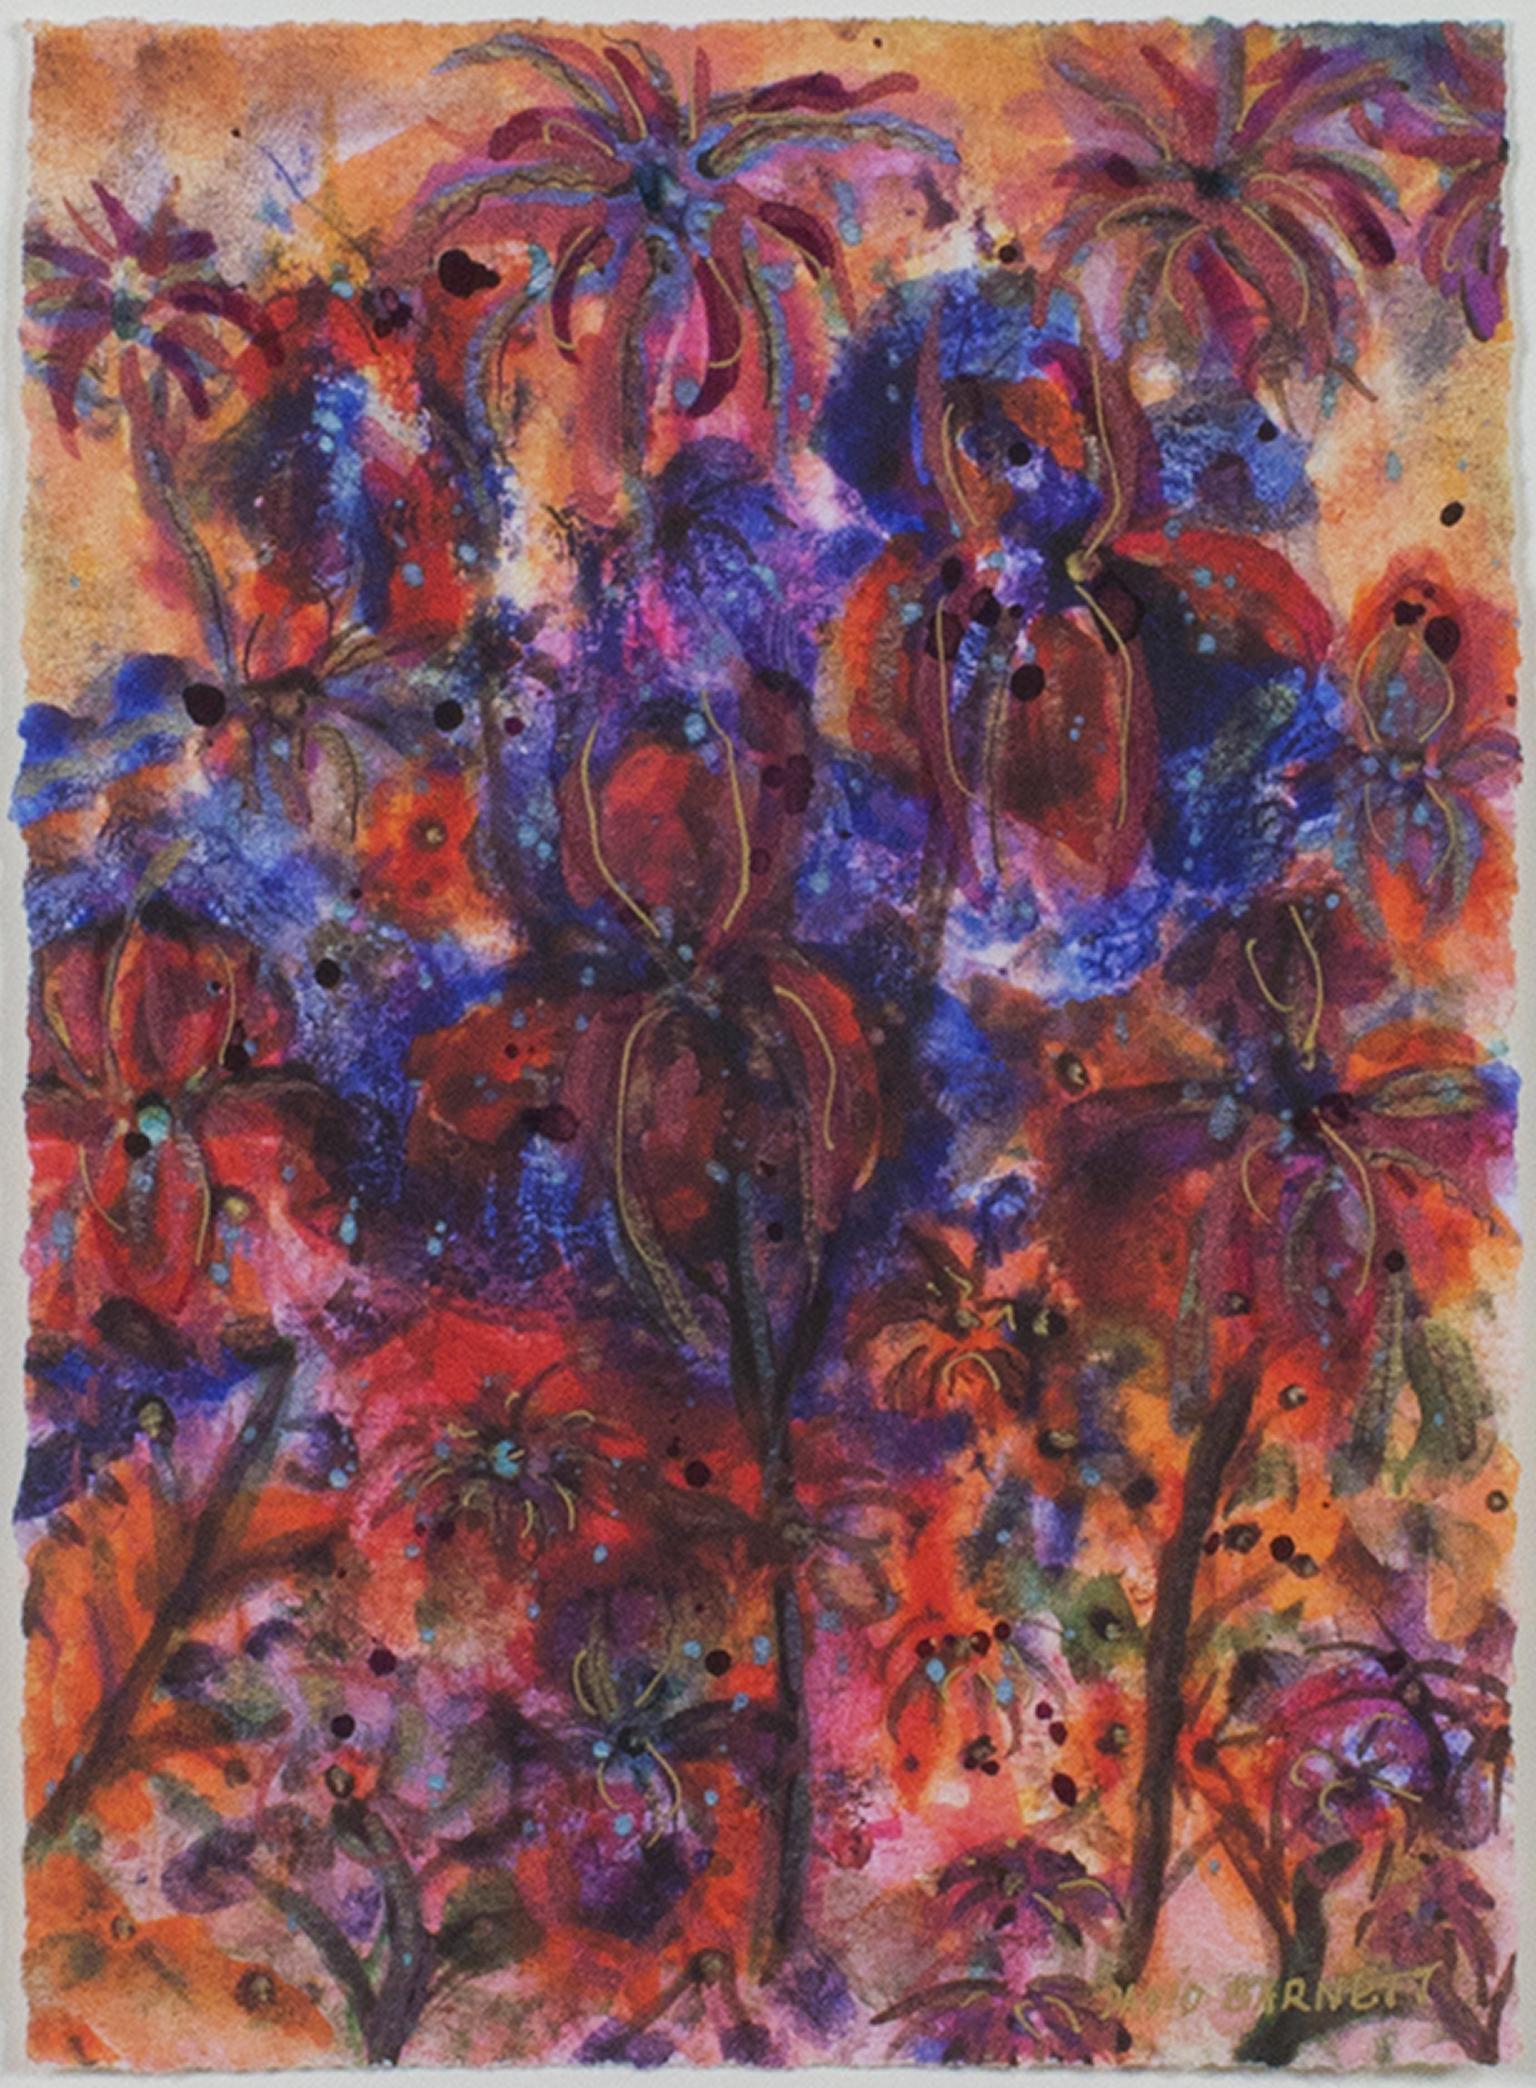 "Sunlit Tropical Orchids" is an original mixed media piece by David Barnett, signed in the lower right.  The expressive brush strokes come together to create brilliant red orchids on a background of deep blue-violet. Smaller flowers surround the